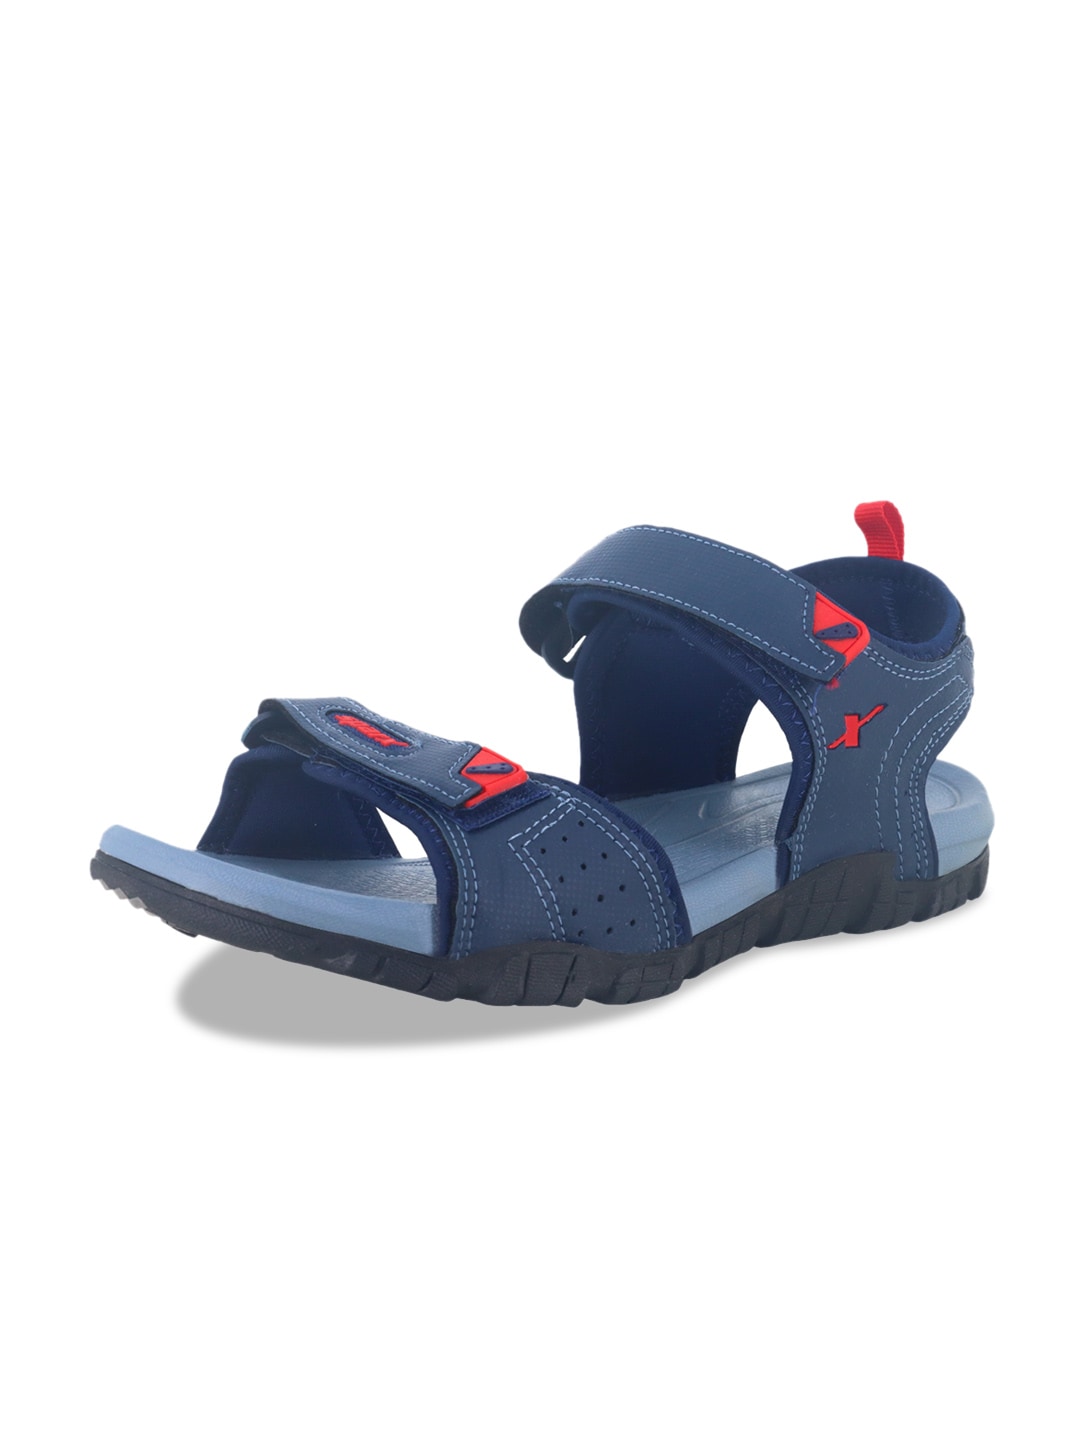 Paragon Kids Grey & Blue P-Toes Sandals - (Fb9107Bp-Grey-Blue) in Pune at  best price by Shoe World - Justdial